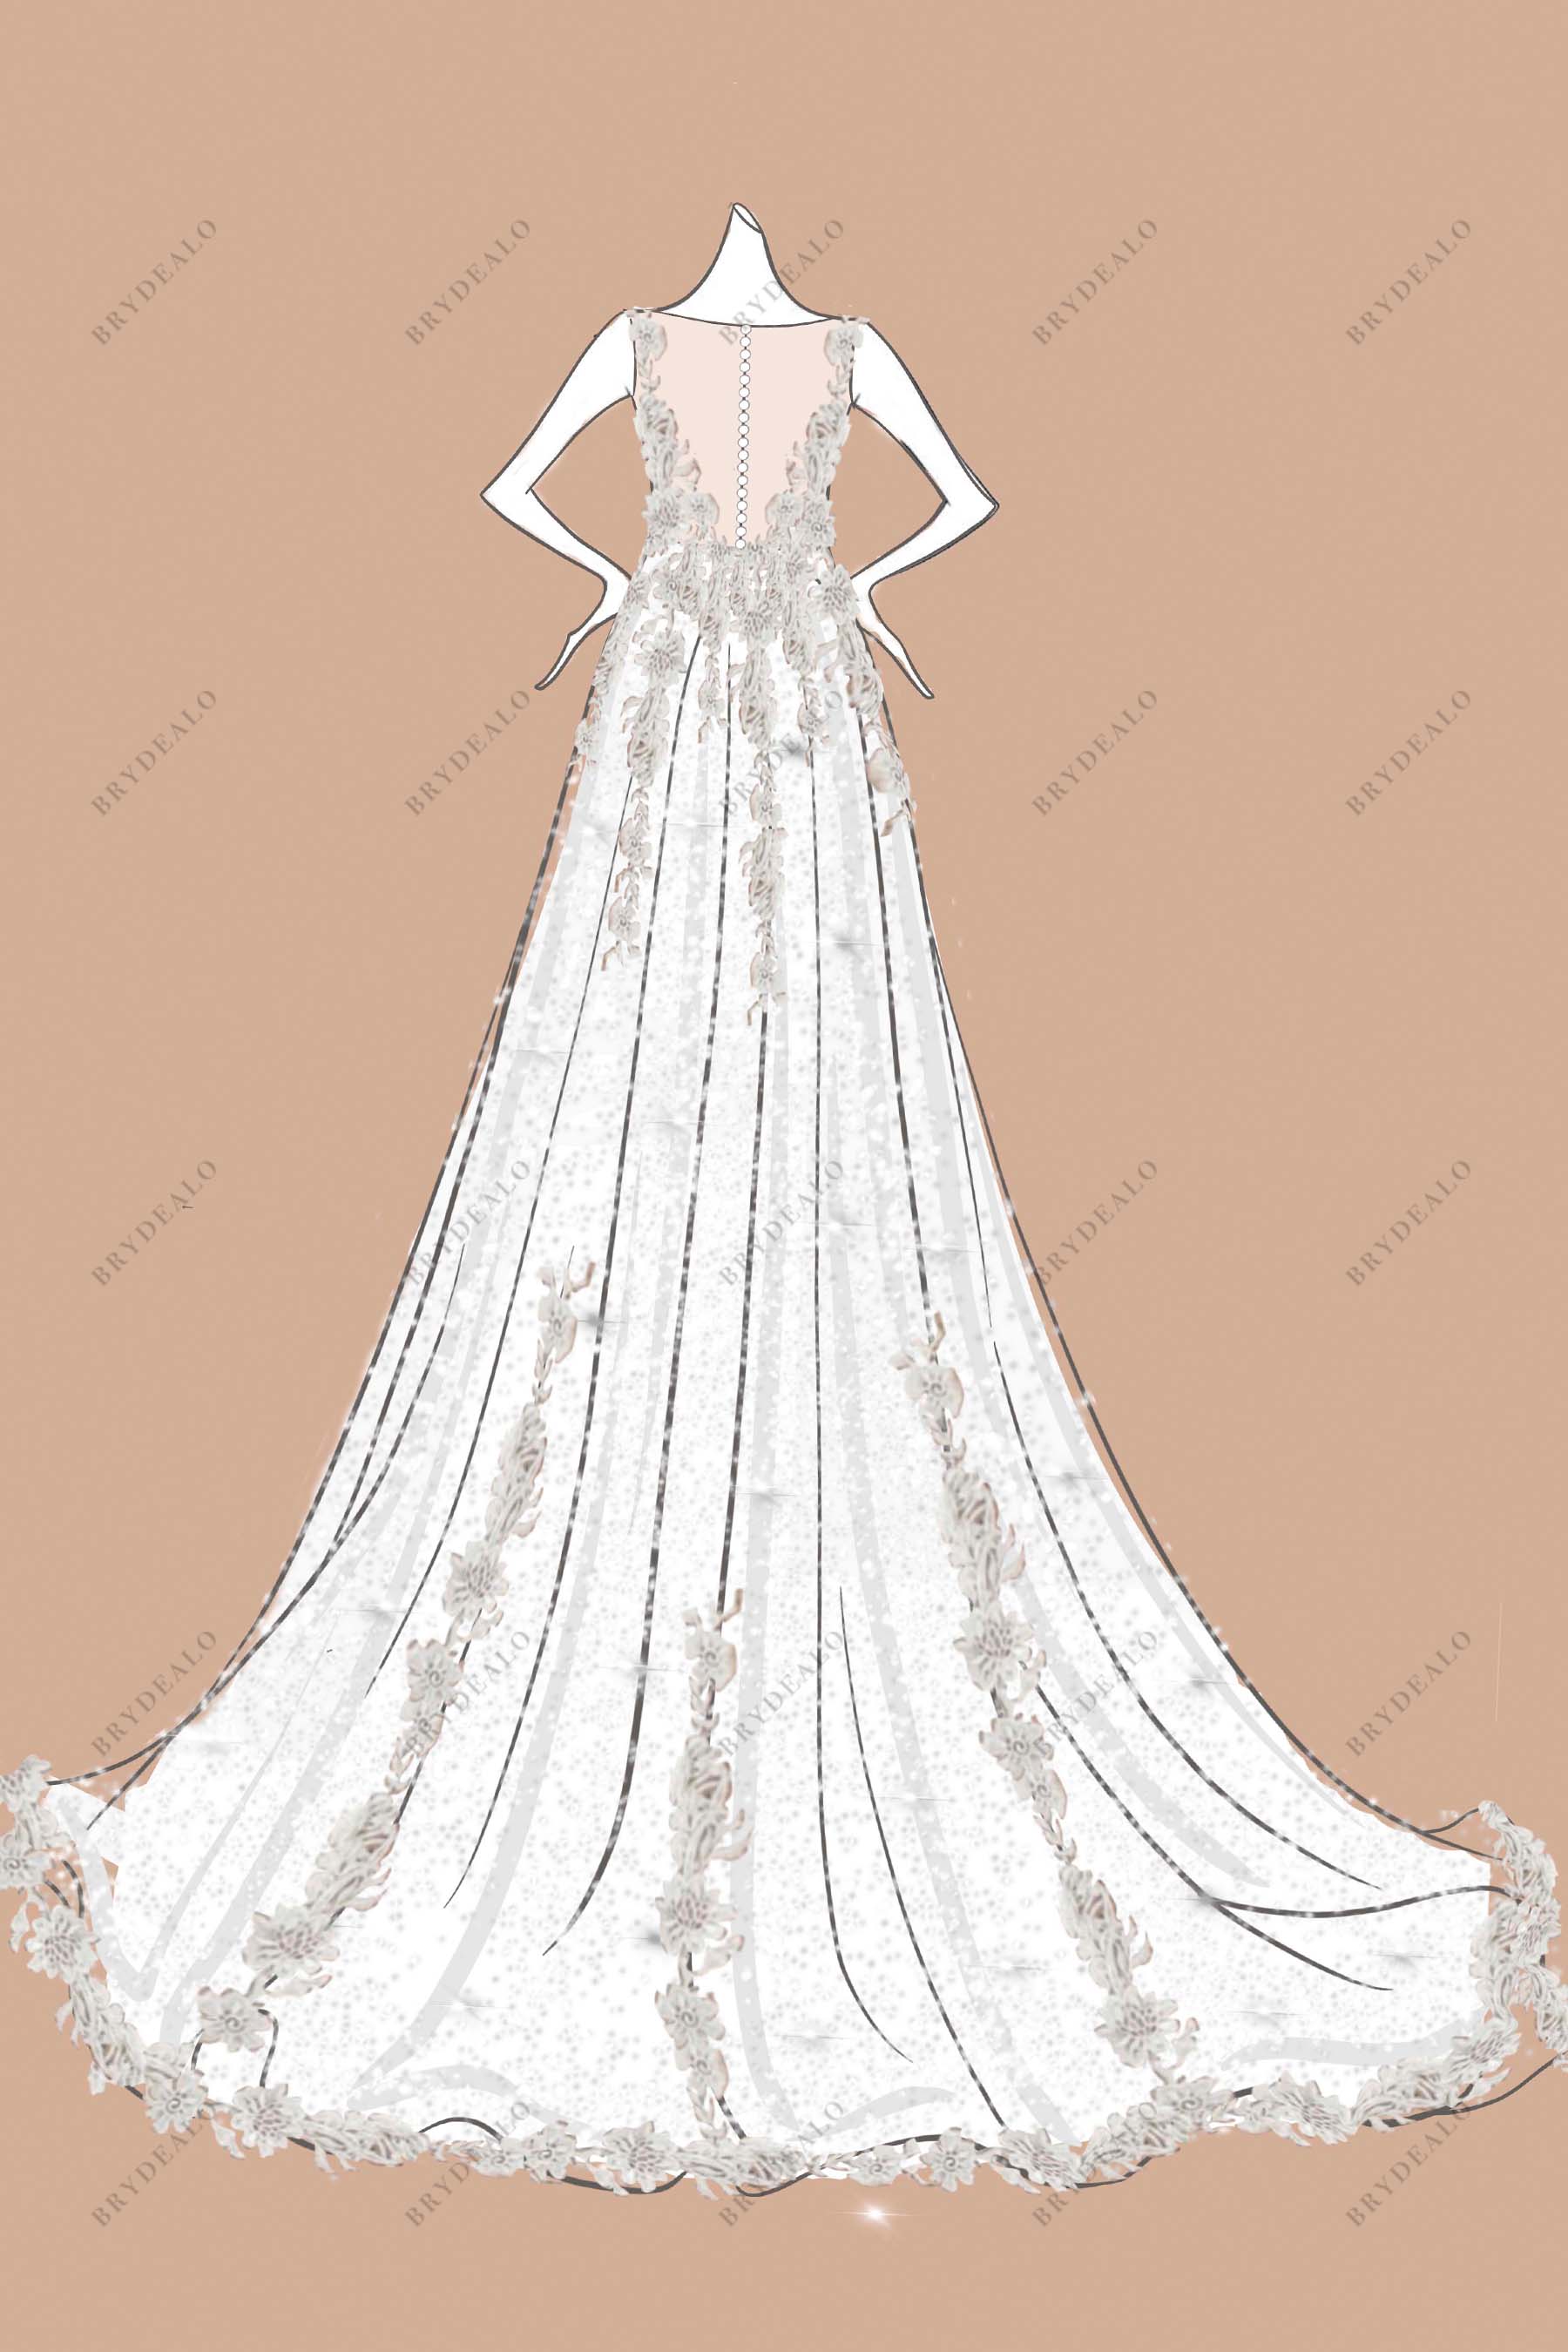 Fashion Design Figure Template Sketchbook: 470 Large Female Figure Template  for Sketching Your Dream Wedding Dress Design Styles | Easy to Create ...  Drawing Book (AAJ1: Two model for per pages.): Ana